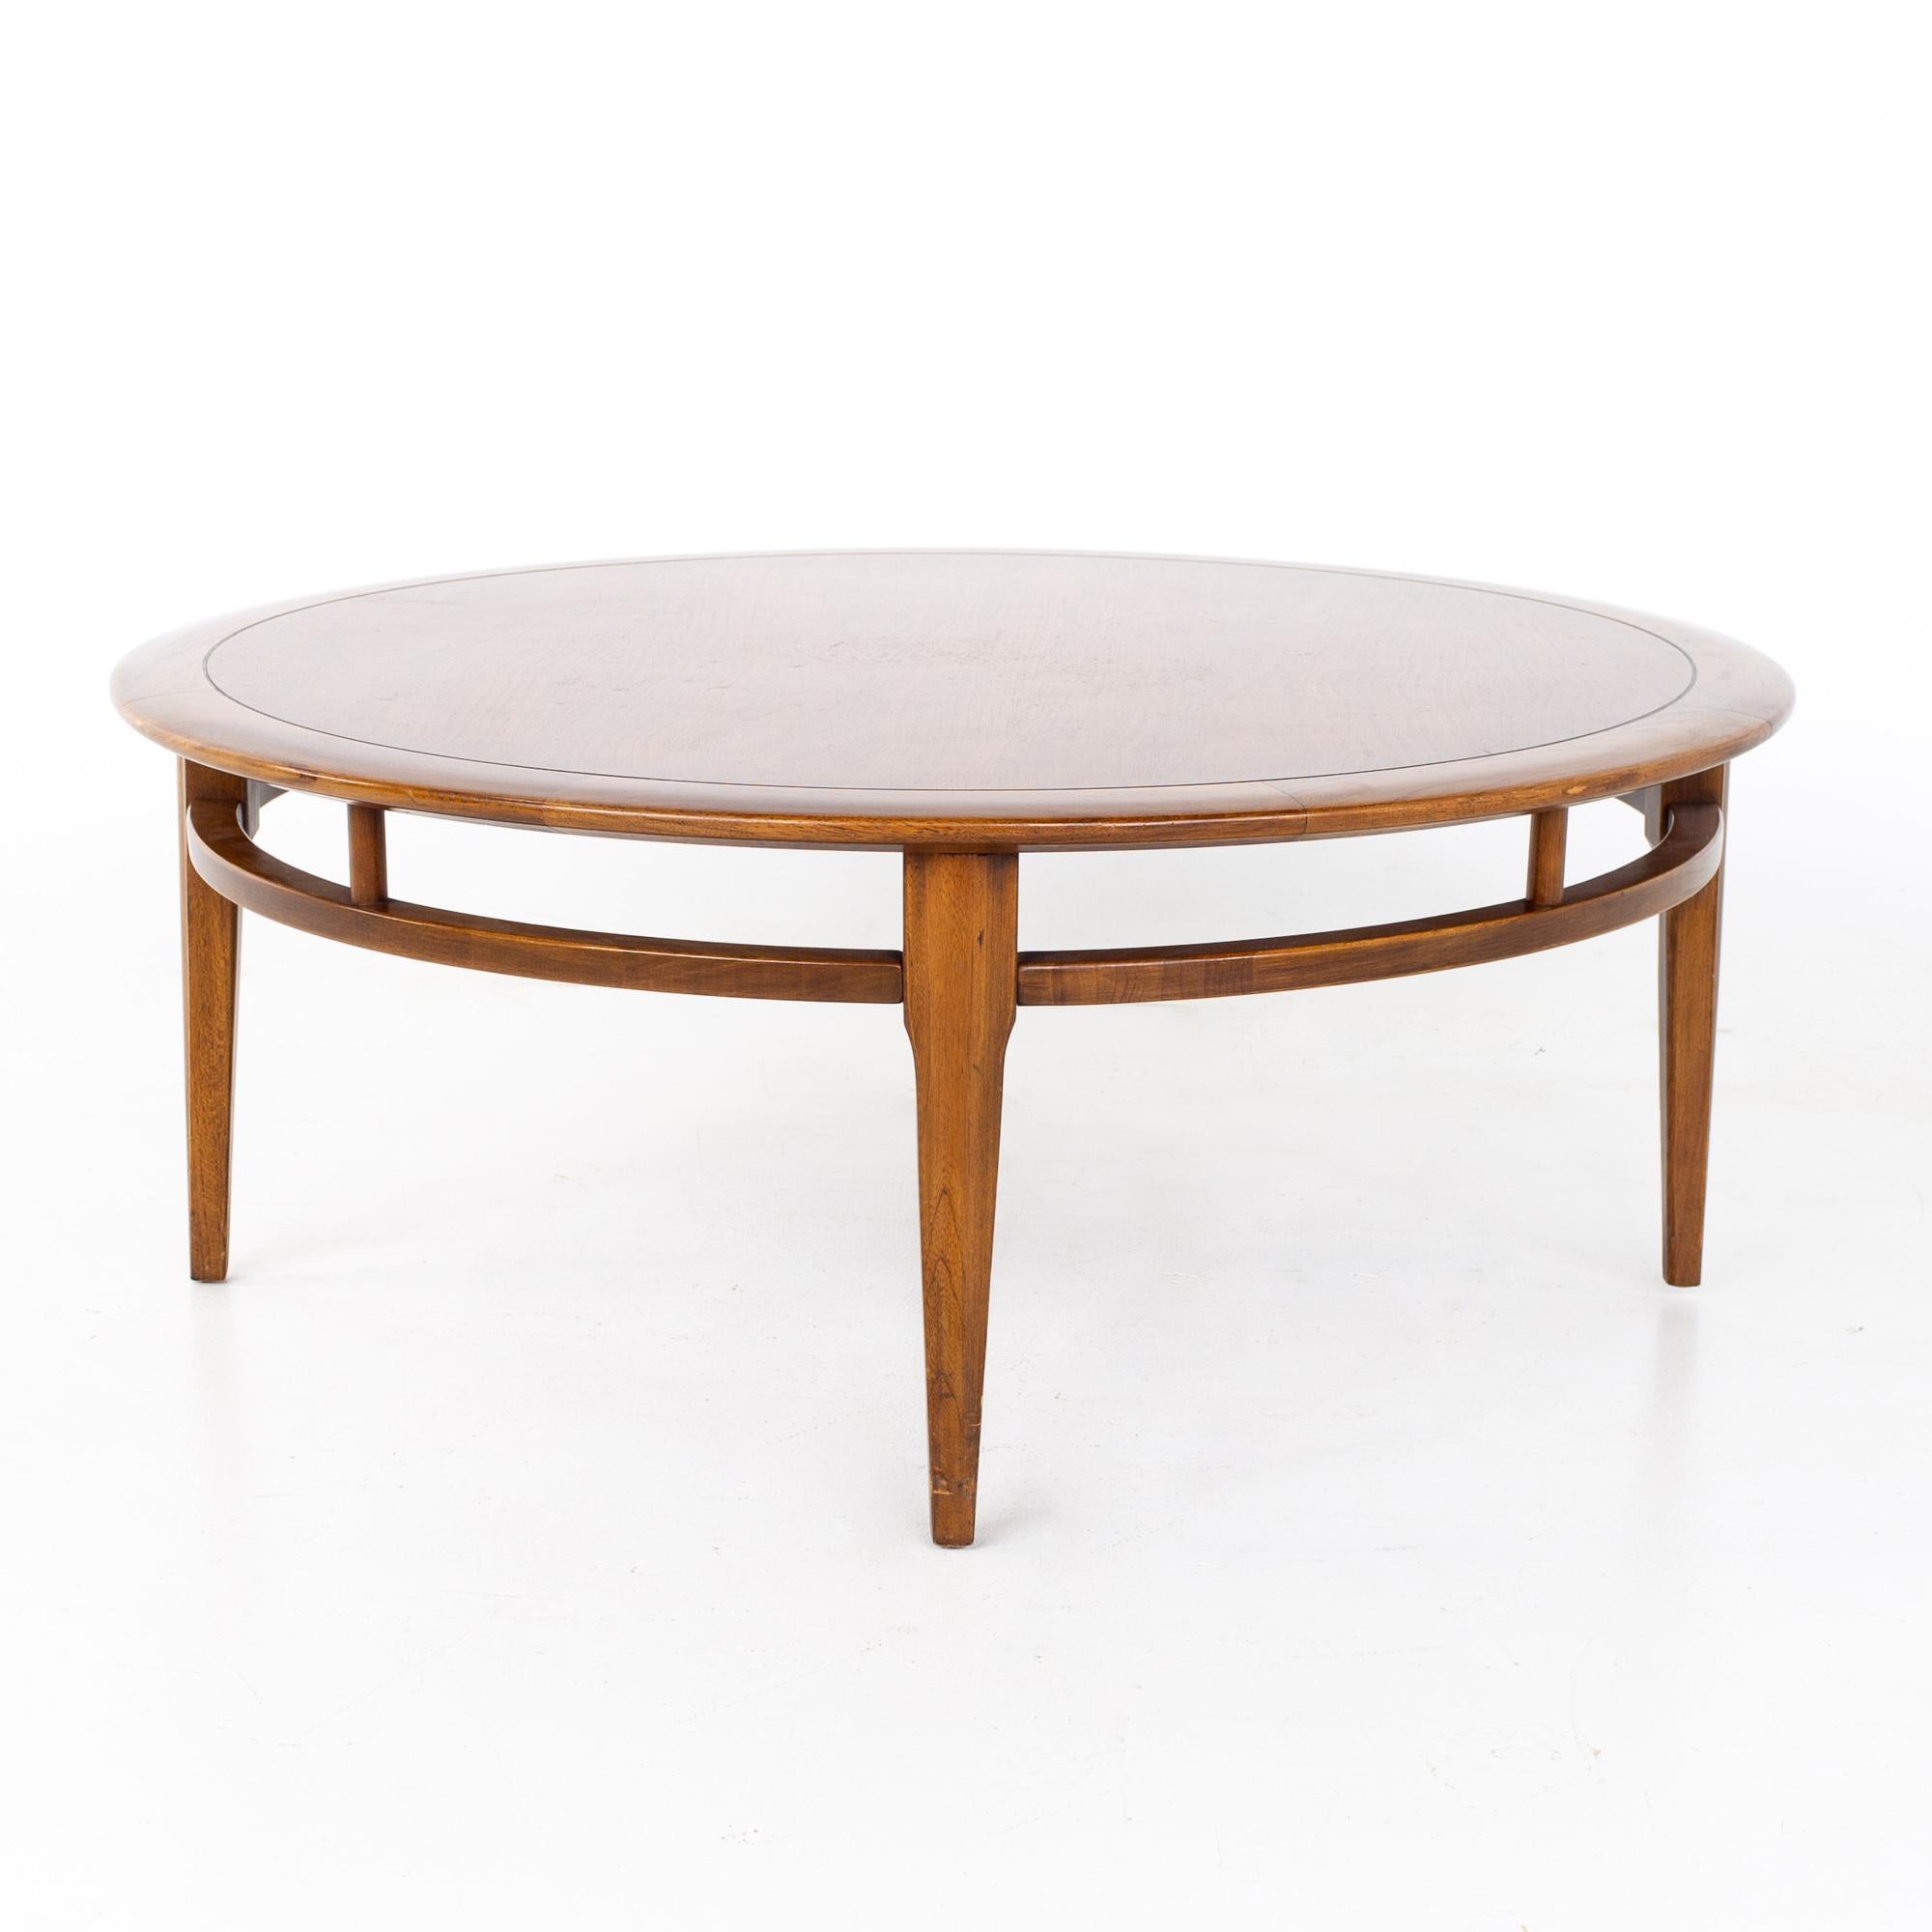 Lane mid century round oak and walnut coffee table
Coffee table measures: 38 wide x 38 deep x 15 inches high

All pieces of furniture can be had in what we call restored vintage condition. That means the piece is restored upon purchase so it’s